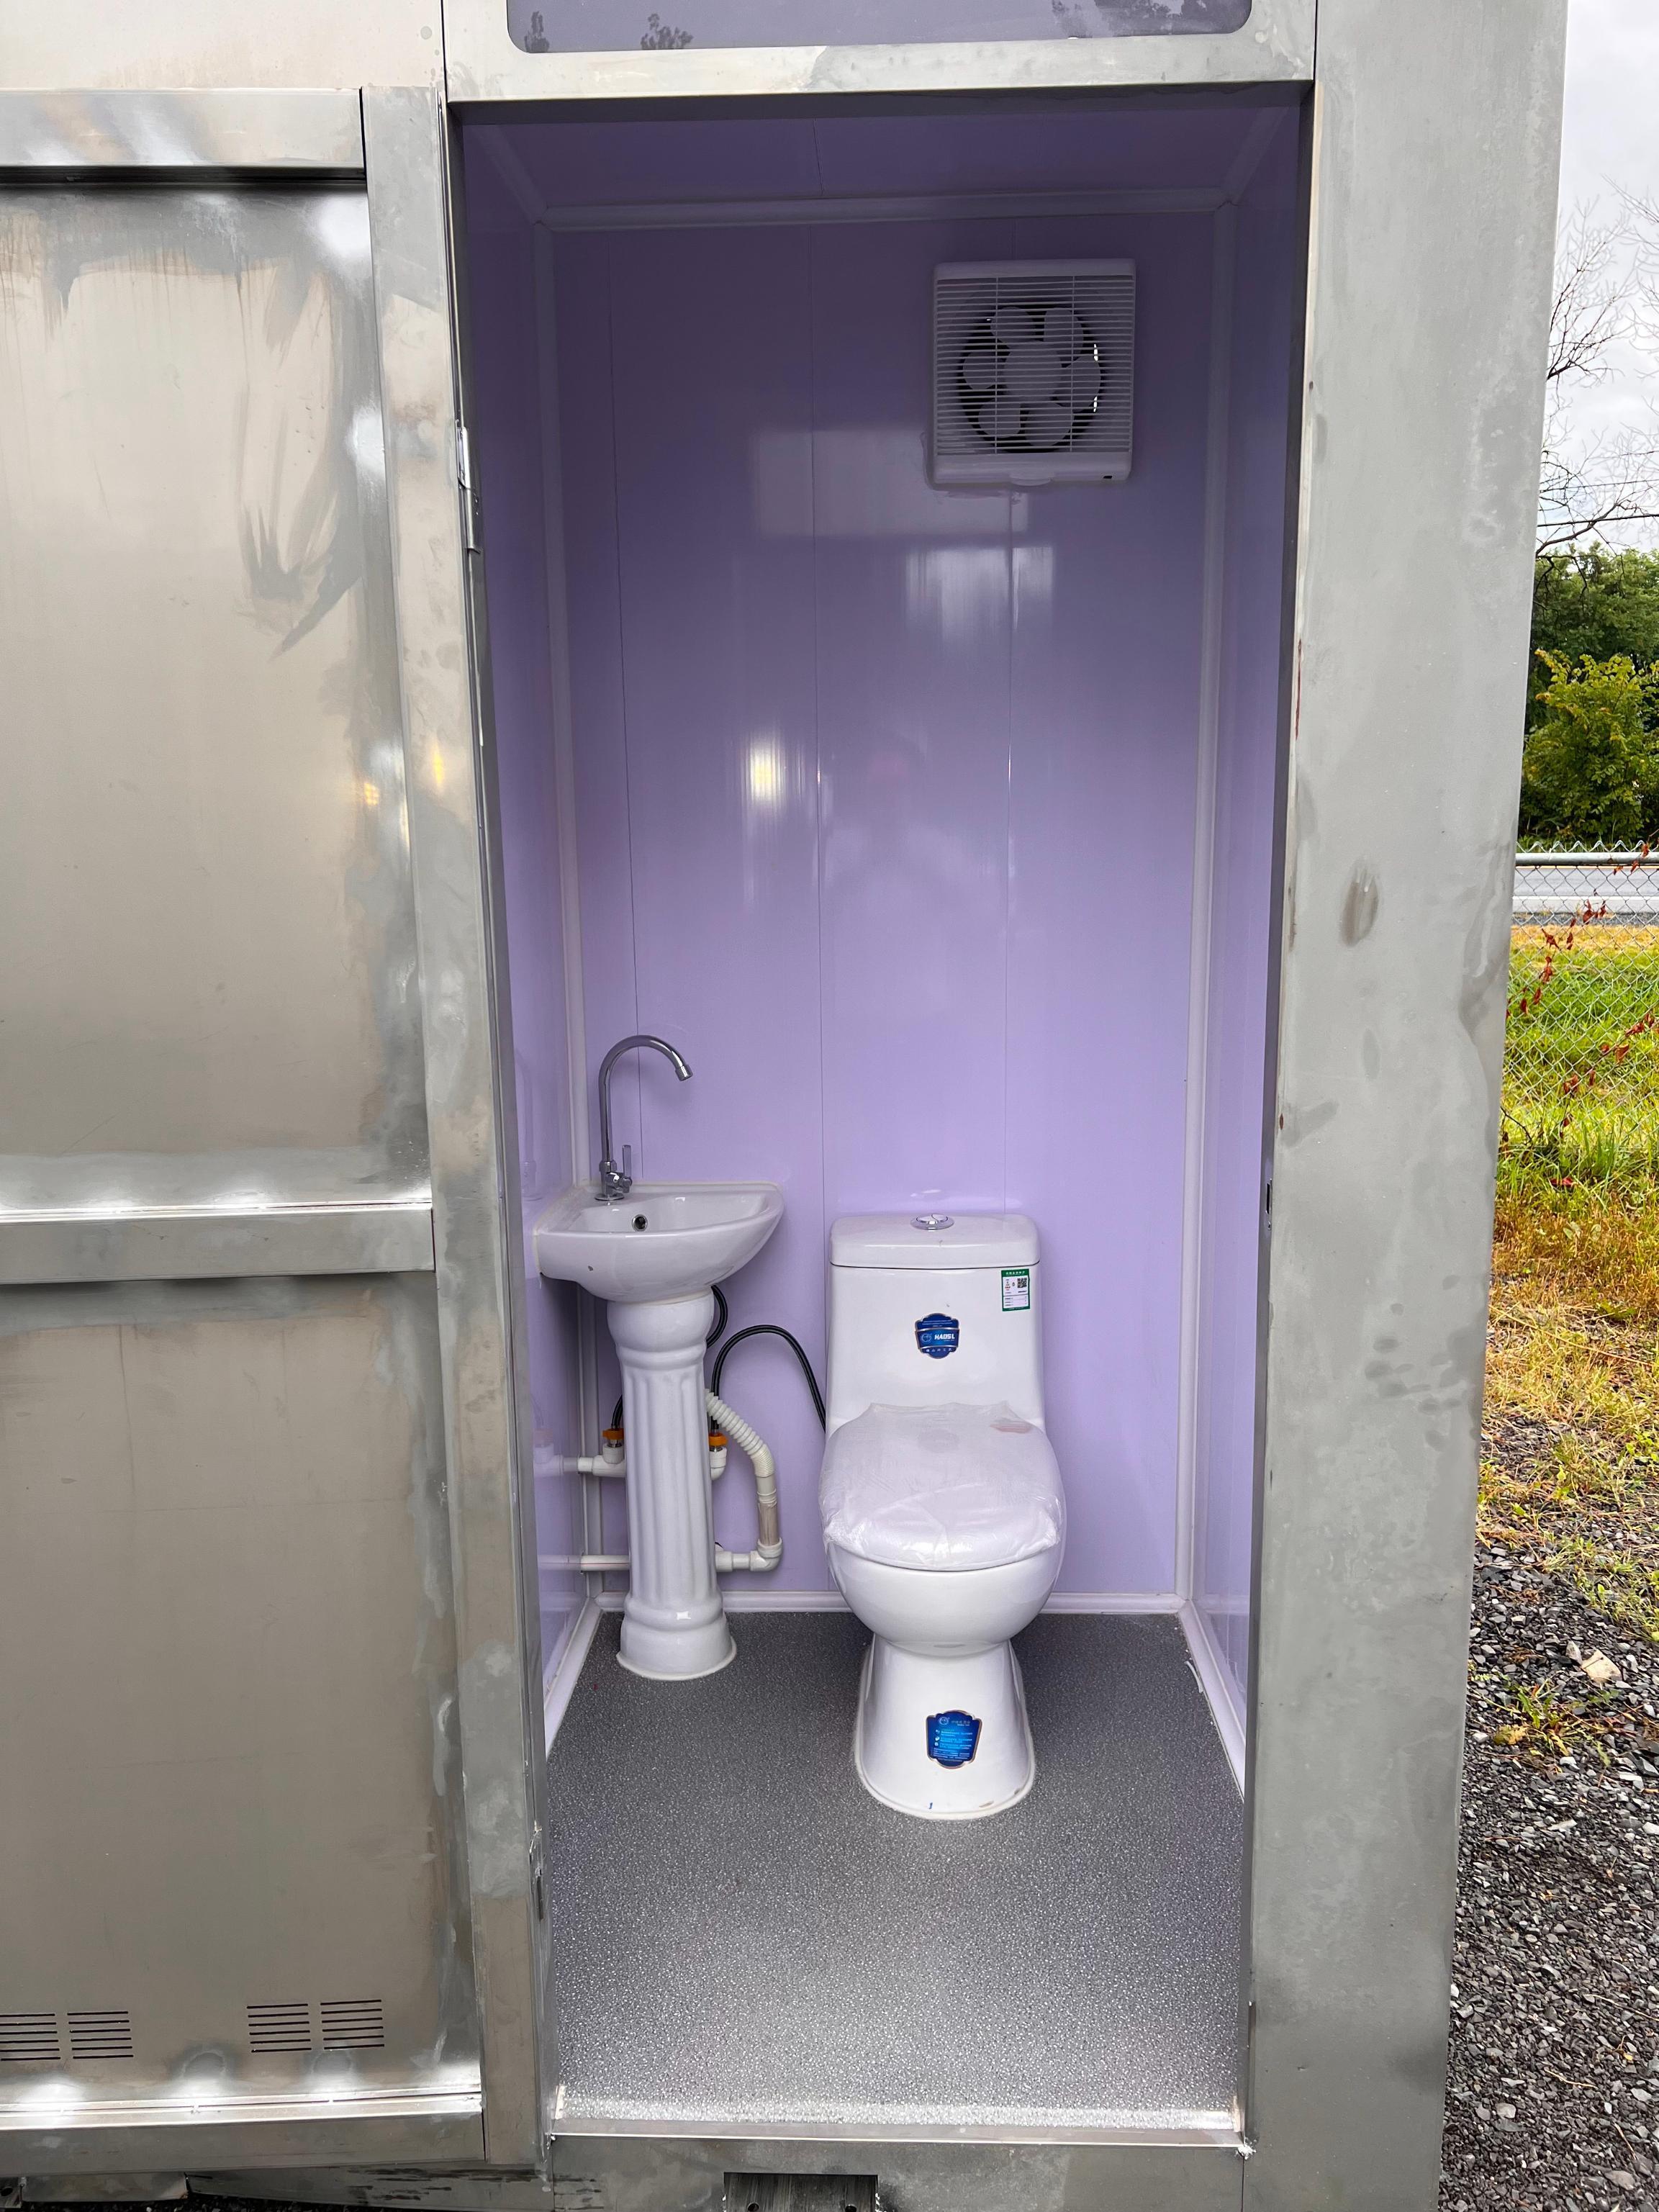 PORTABLE BATHROOM STATION NEW PORTABLE TOILET equipped with 2 toilets, 2 sinks, ventilation fan,